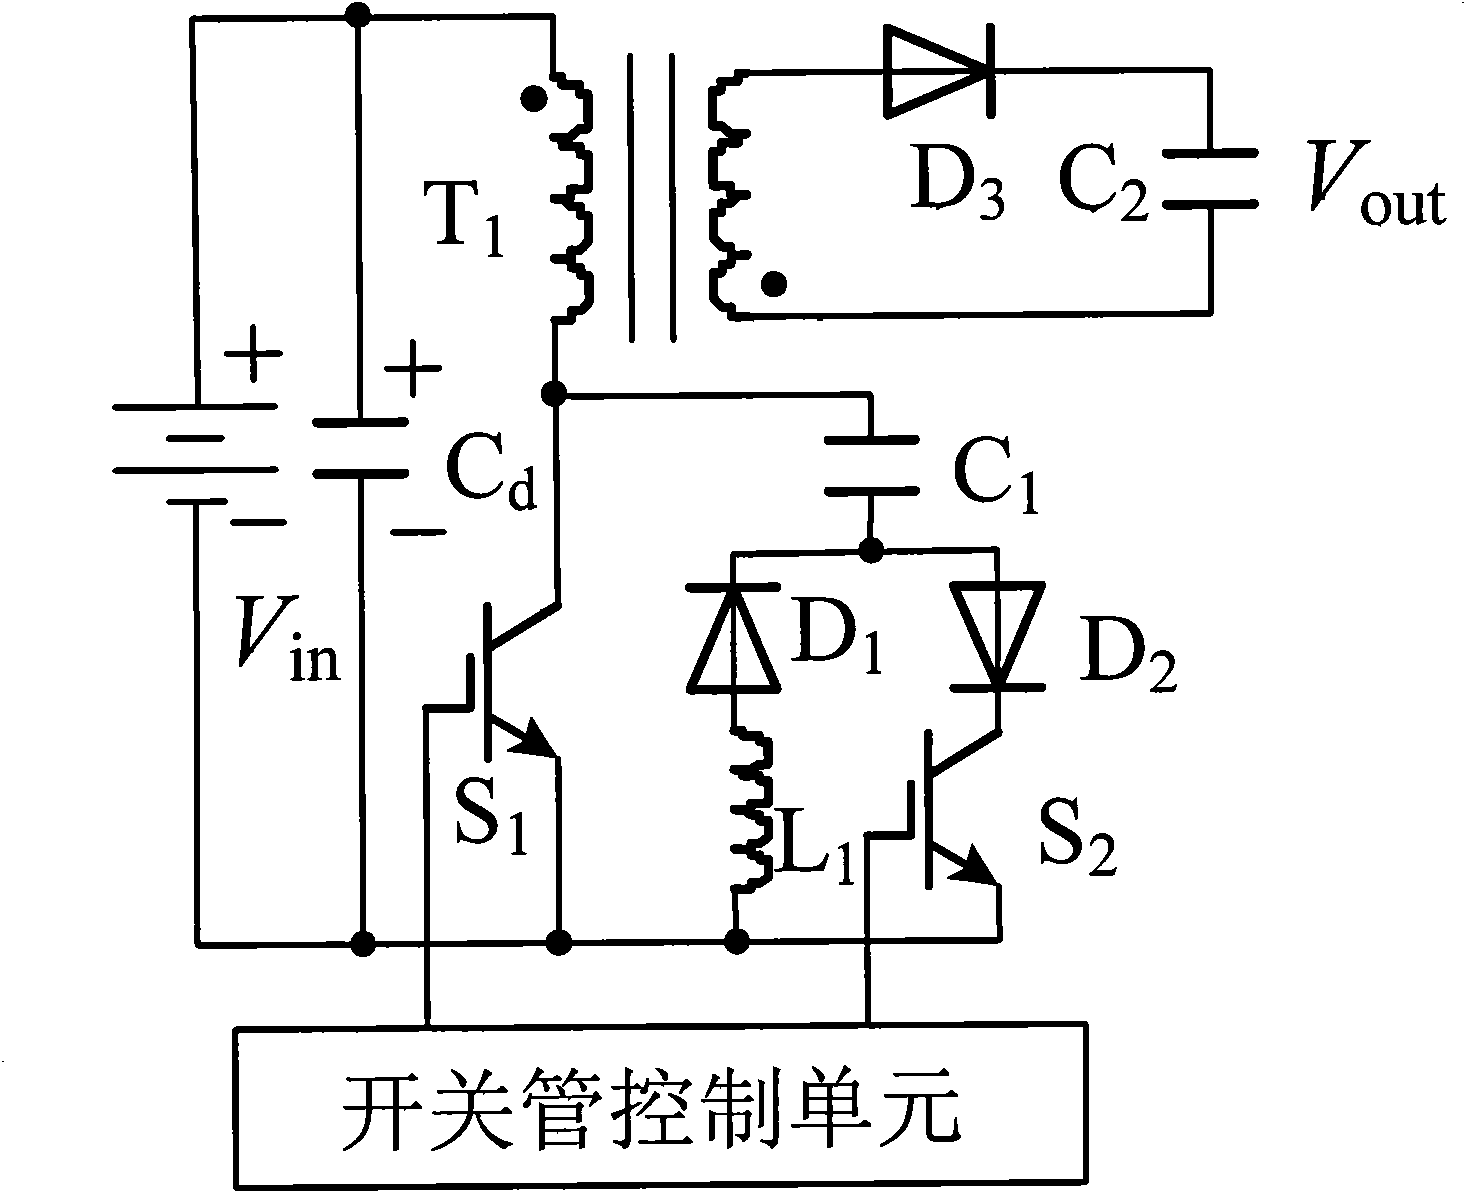 Flyback converter leakage inductance absorption and soft switching control